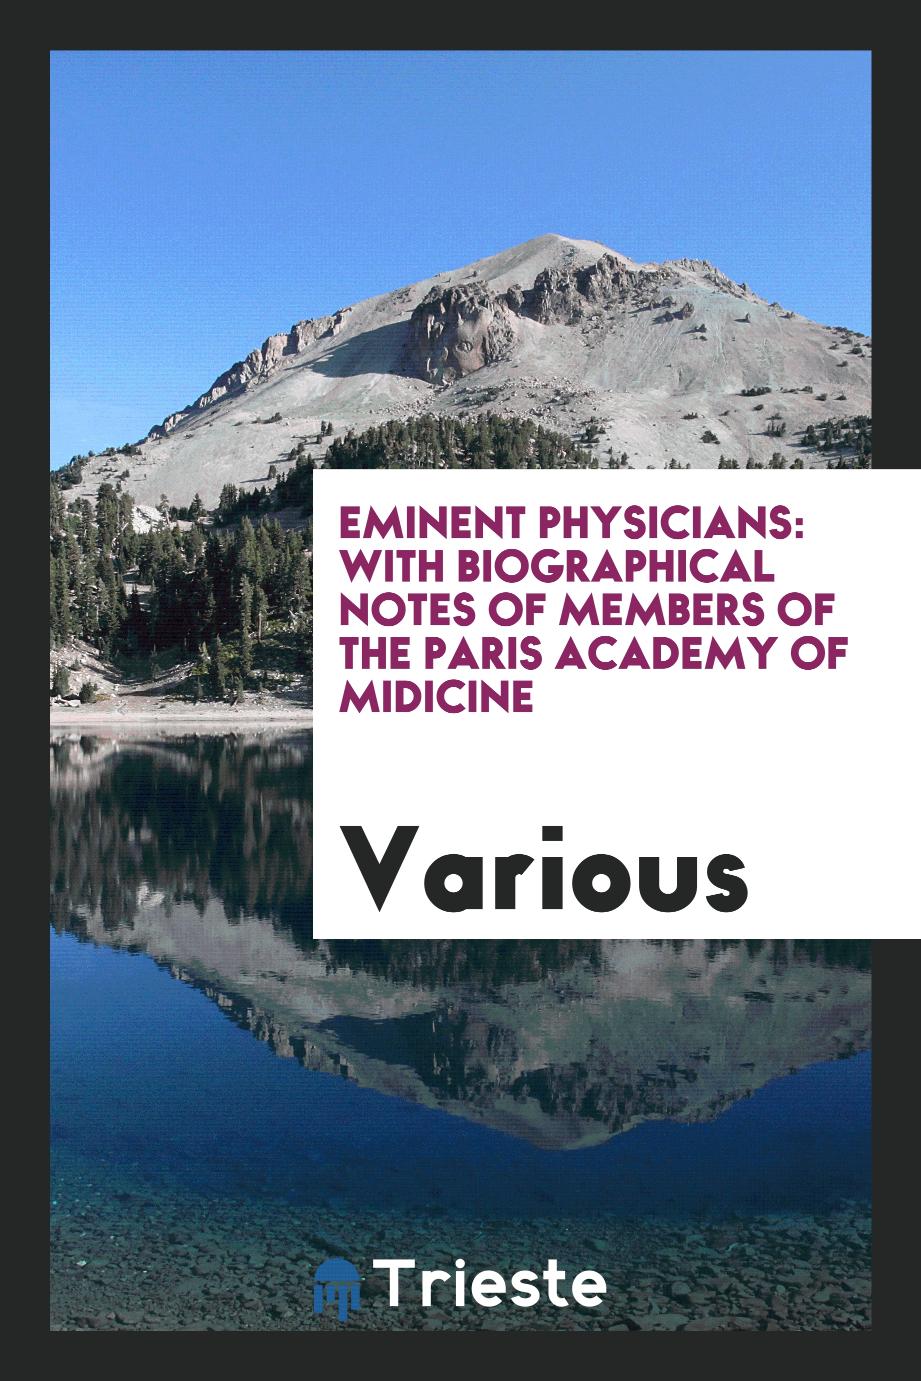 Eminent physicians: with biographical notes of members of the Paris Academy of Midicine